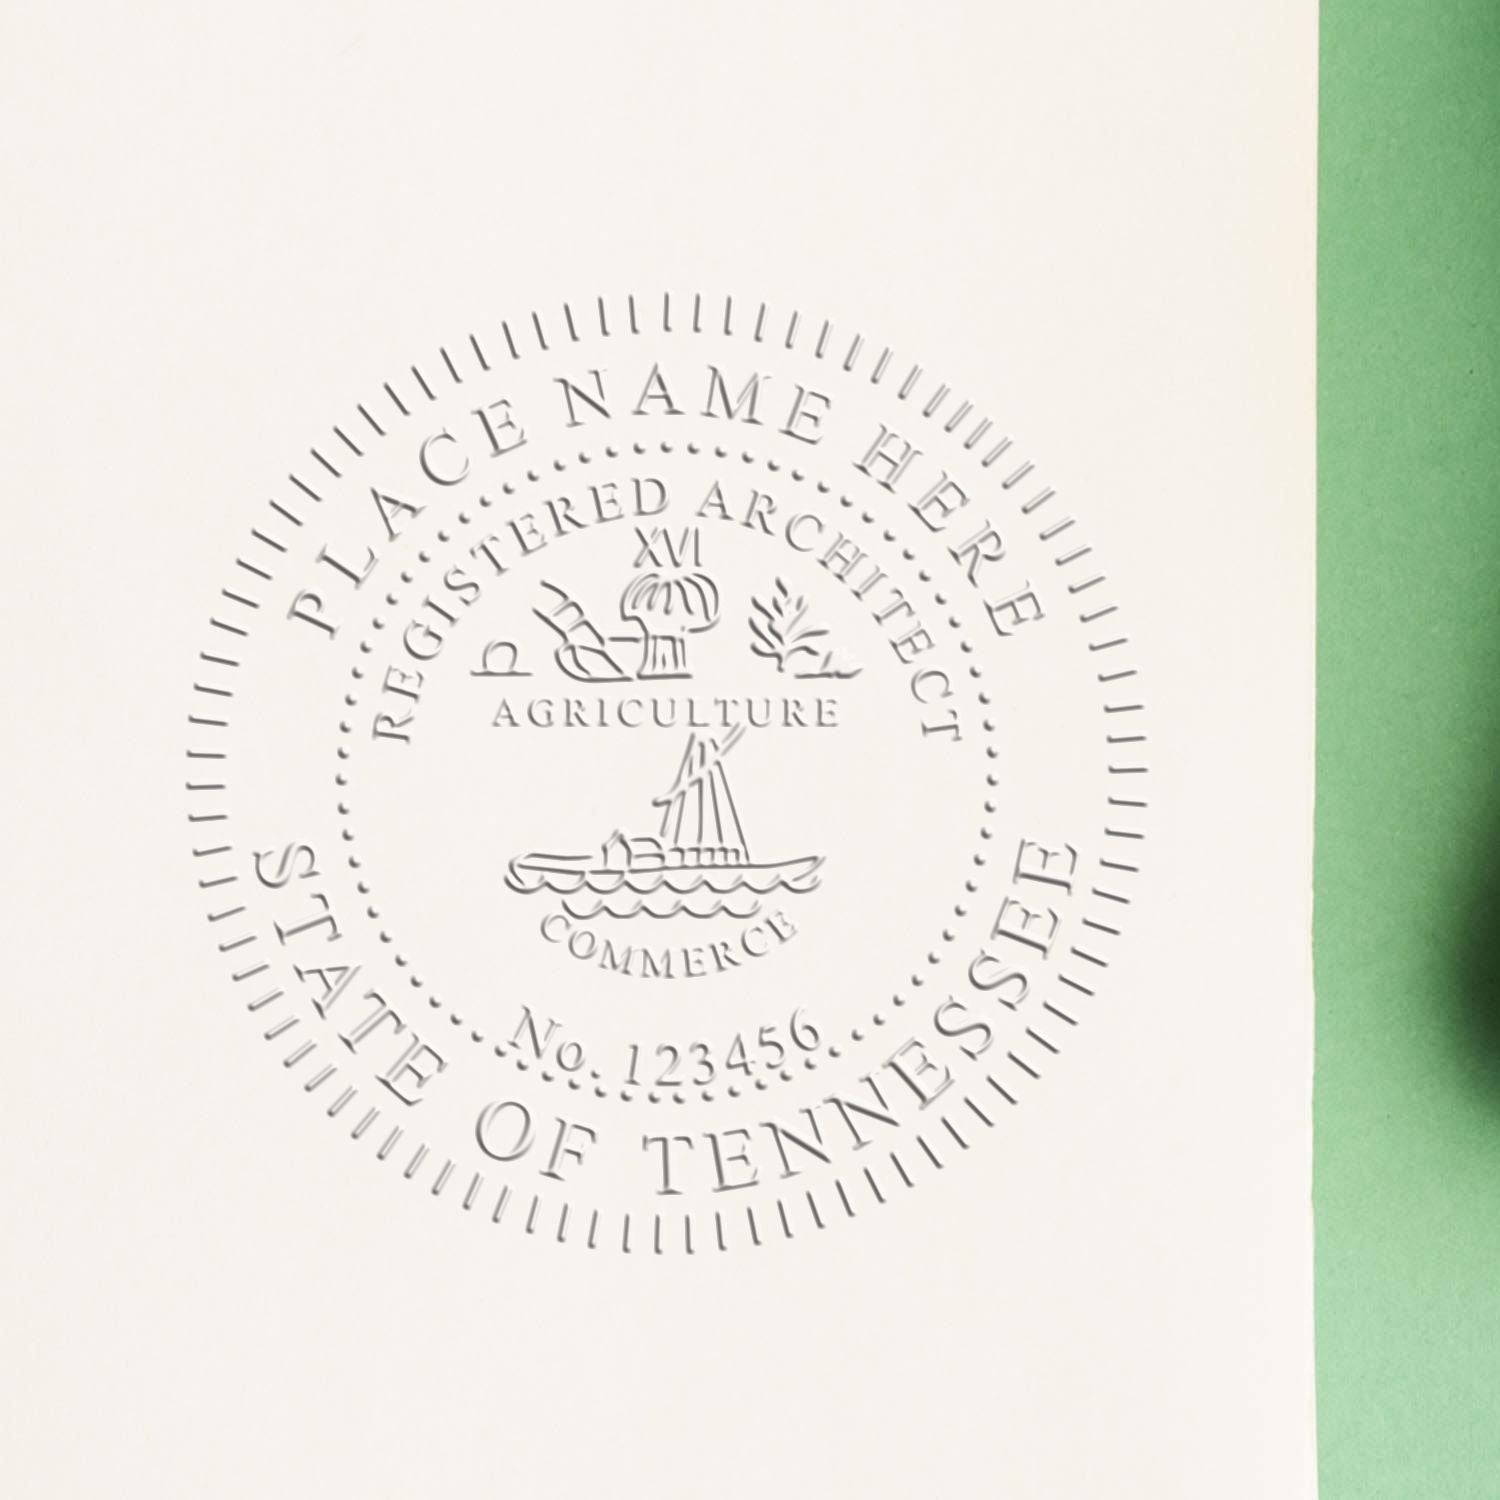 The State of Tennessee Architectural Seal Embosser stamp impression comes to life with a crisp, detailed photo on paper - showcasing true professional quality.